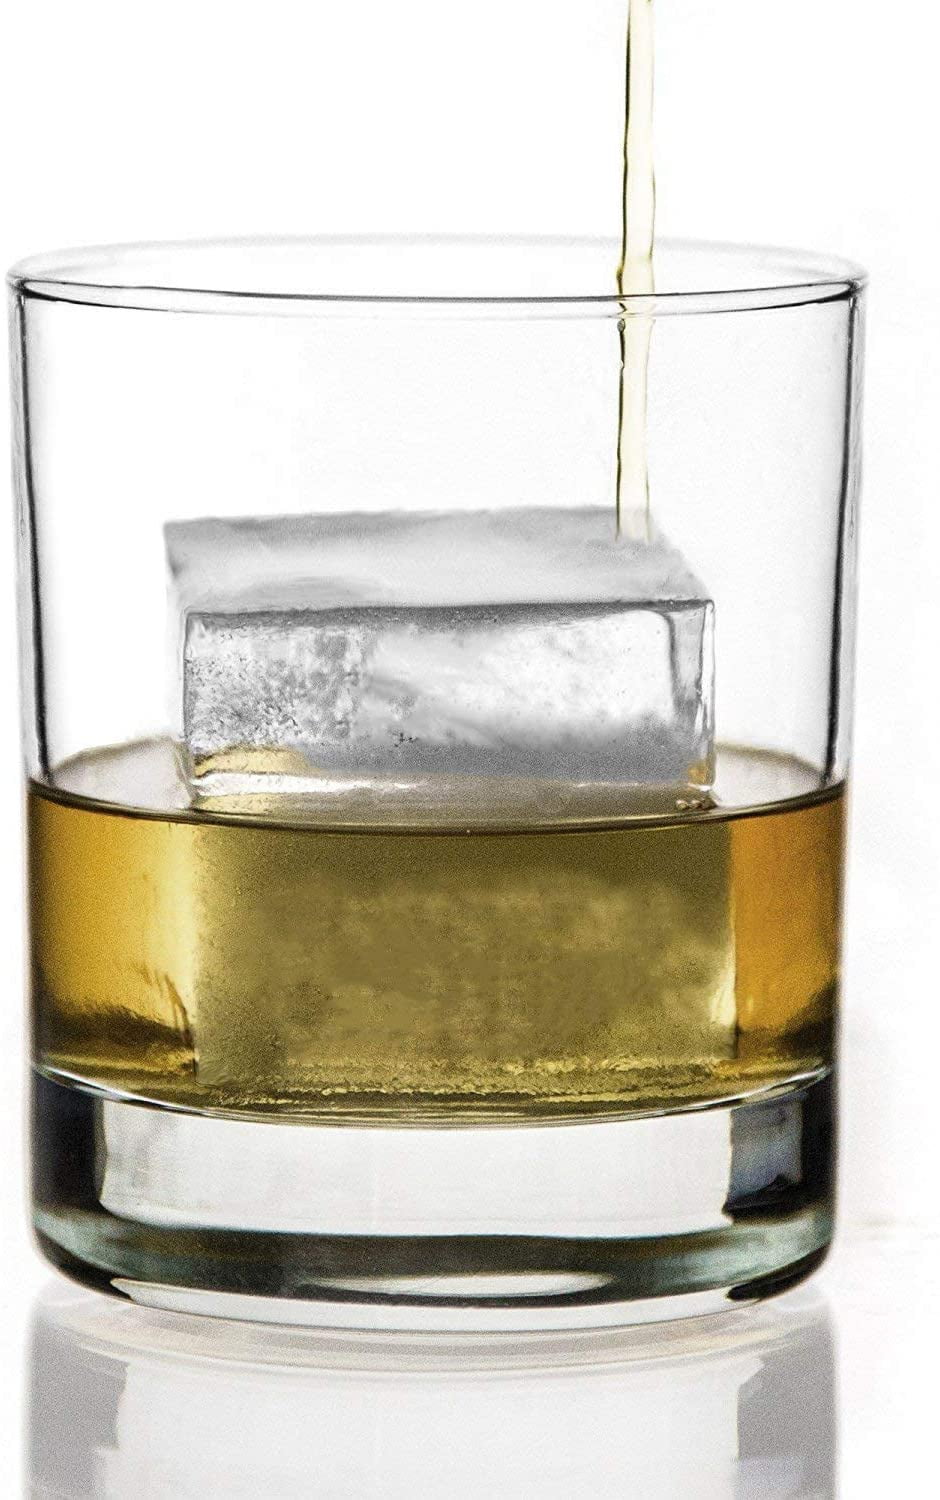 Bourbon Ice Cube Trays Giant Square 2.2 Whiskey Molds 6 cubes tray - –